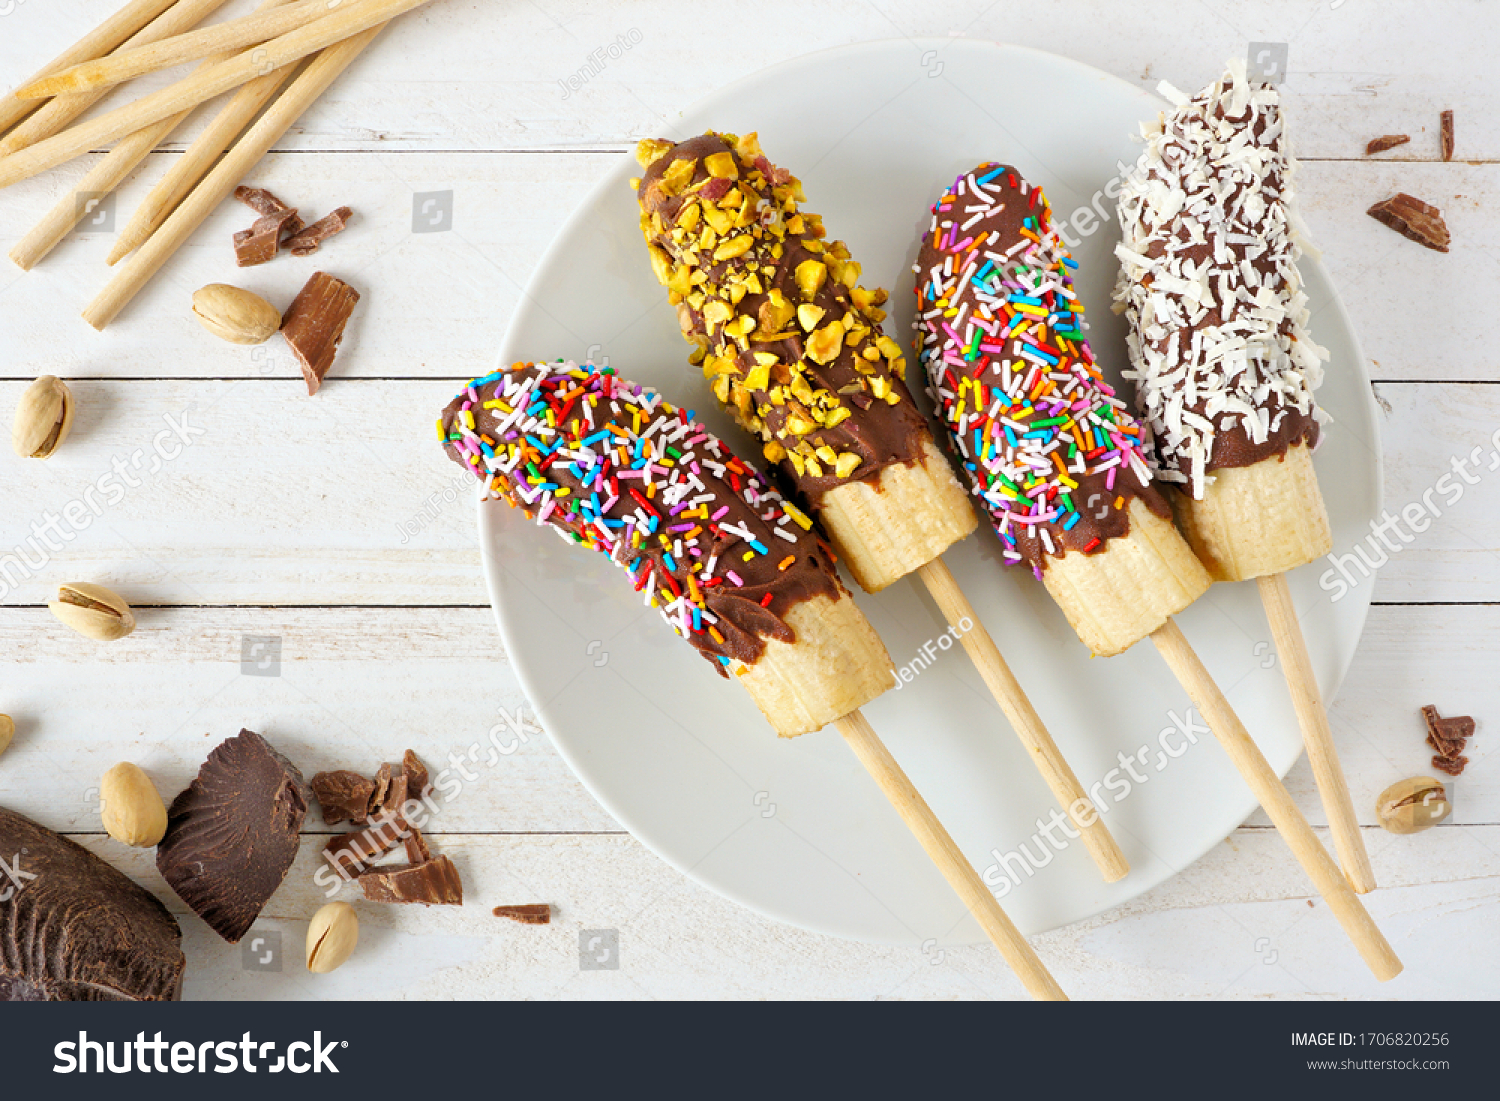 Frozen chocolate dipped banana pops with sprinkles, nuts and coconut. Overhead view table scene on a wood background. #1706820256